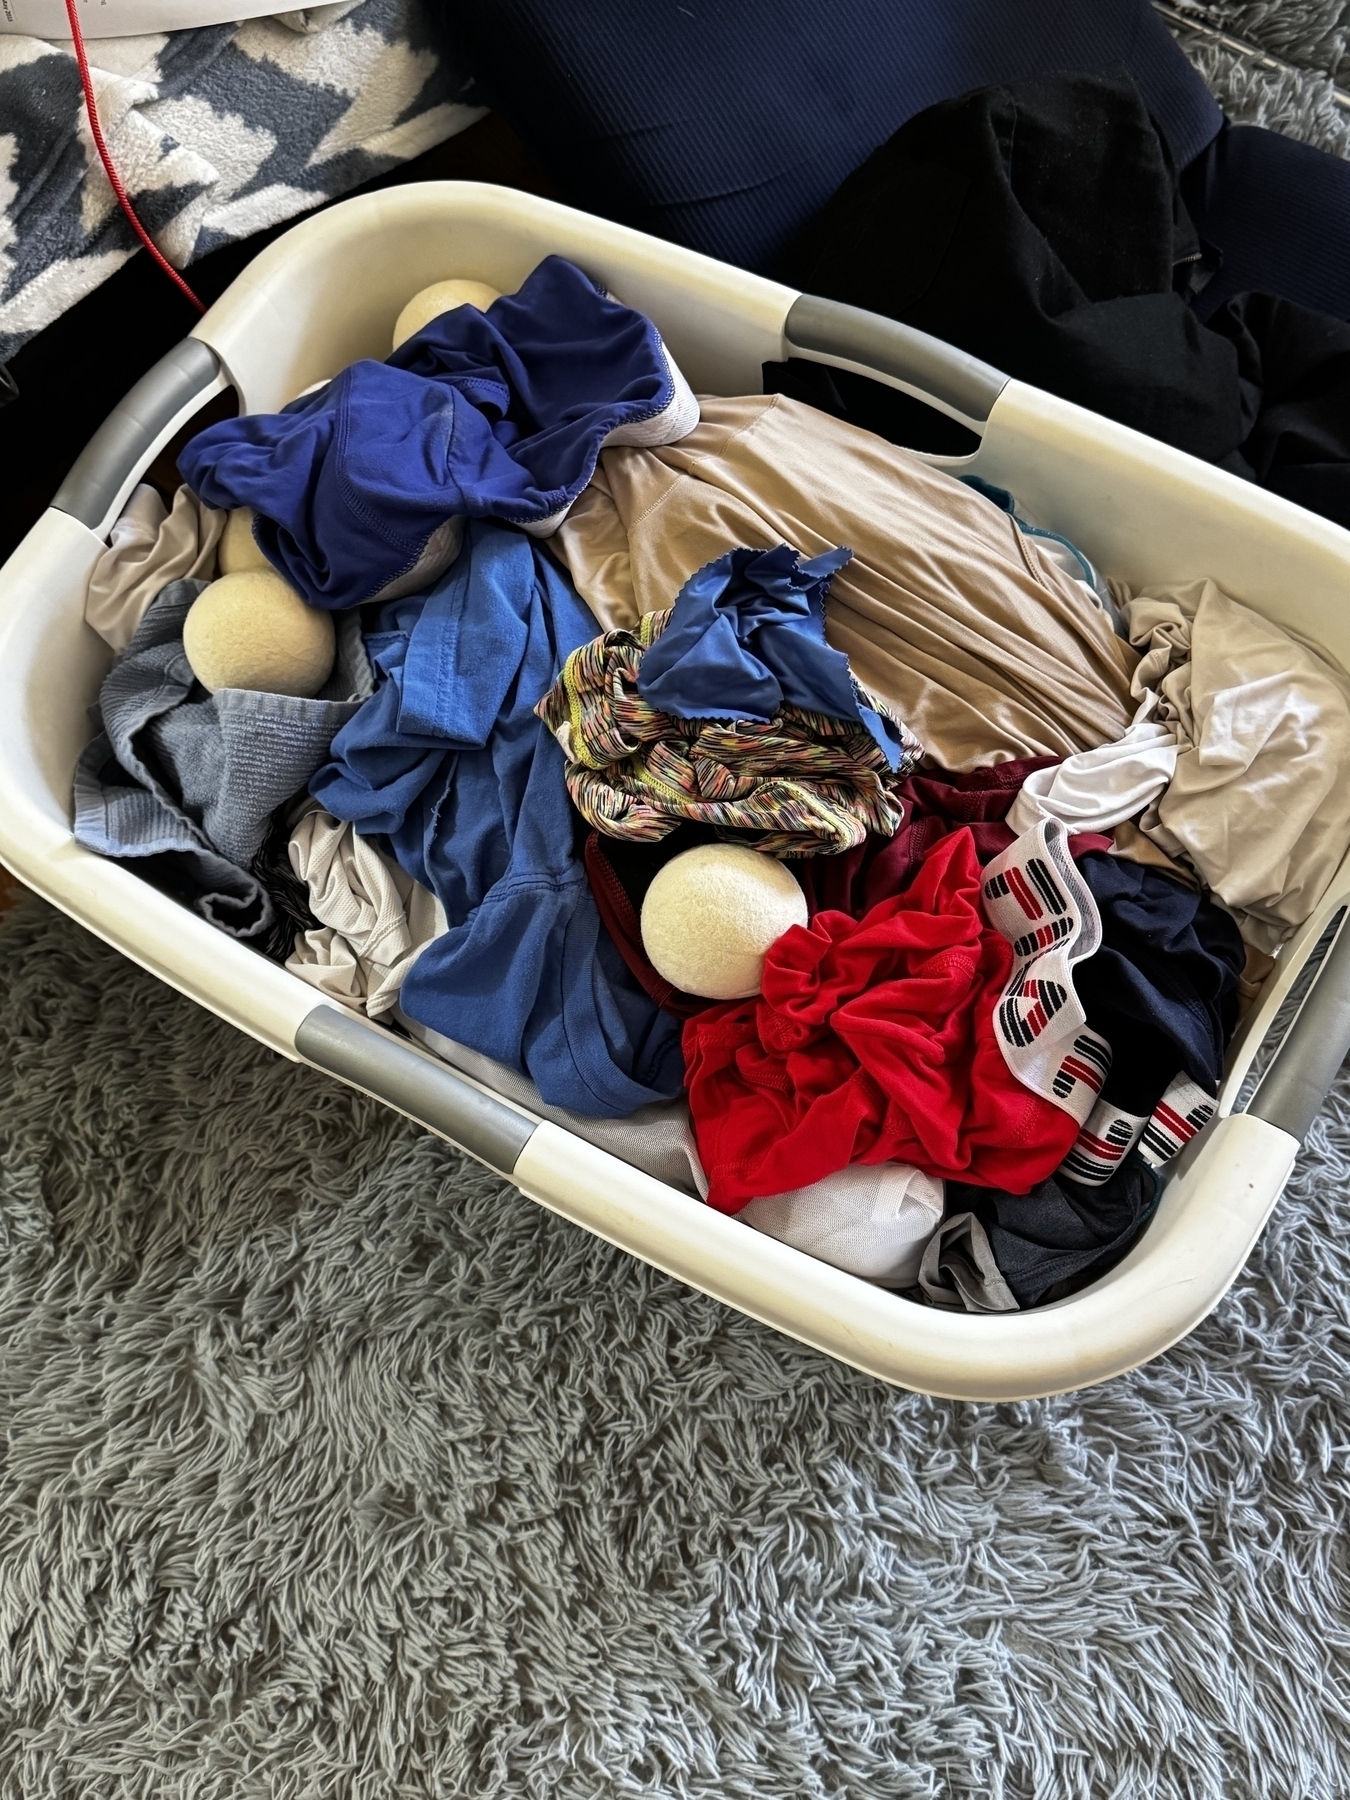  A white plastic laundry basket full of clothes and 3 dryer balls.